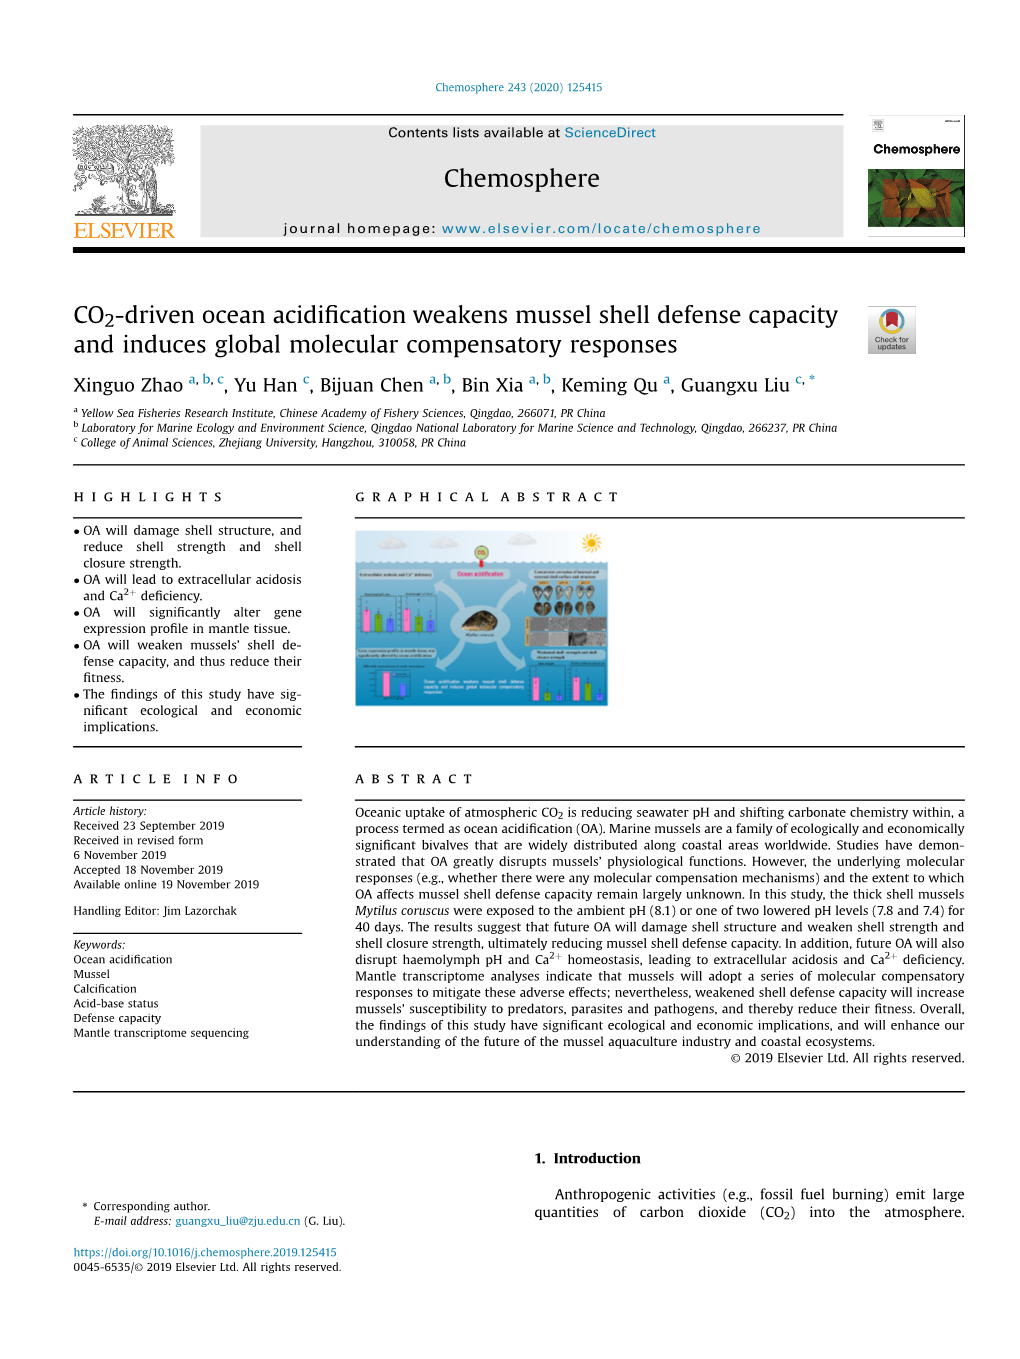 CO2-Driven Ocean Acidification Weakens Mussel Shell Defense Capacity and Induces Global Molecular Compensatory Responses